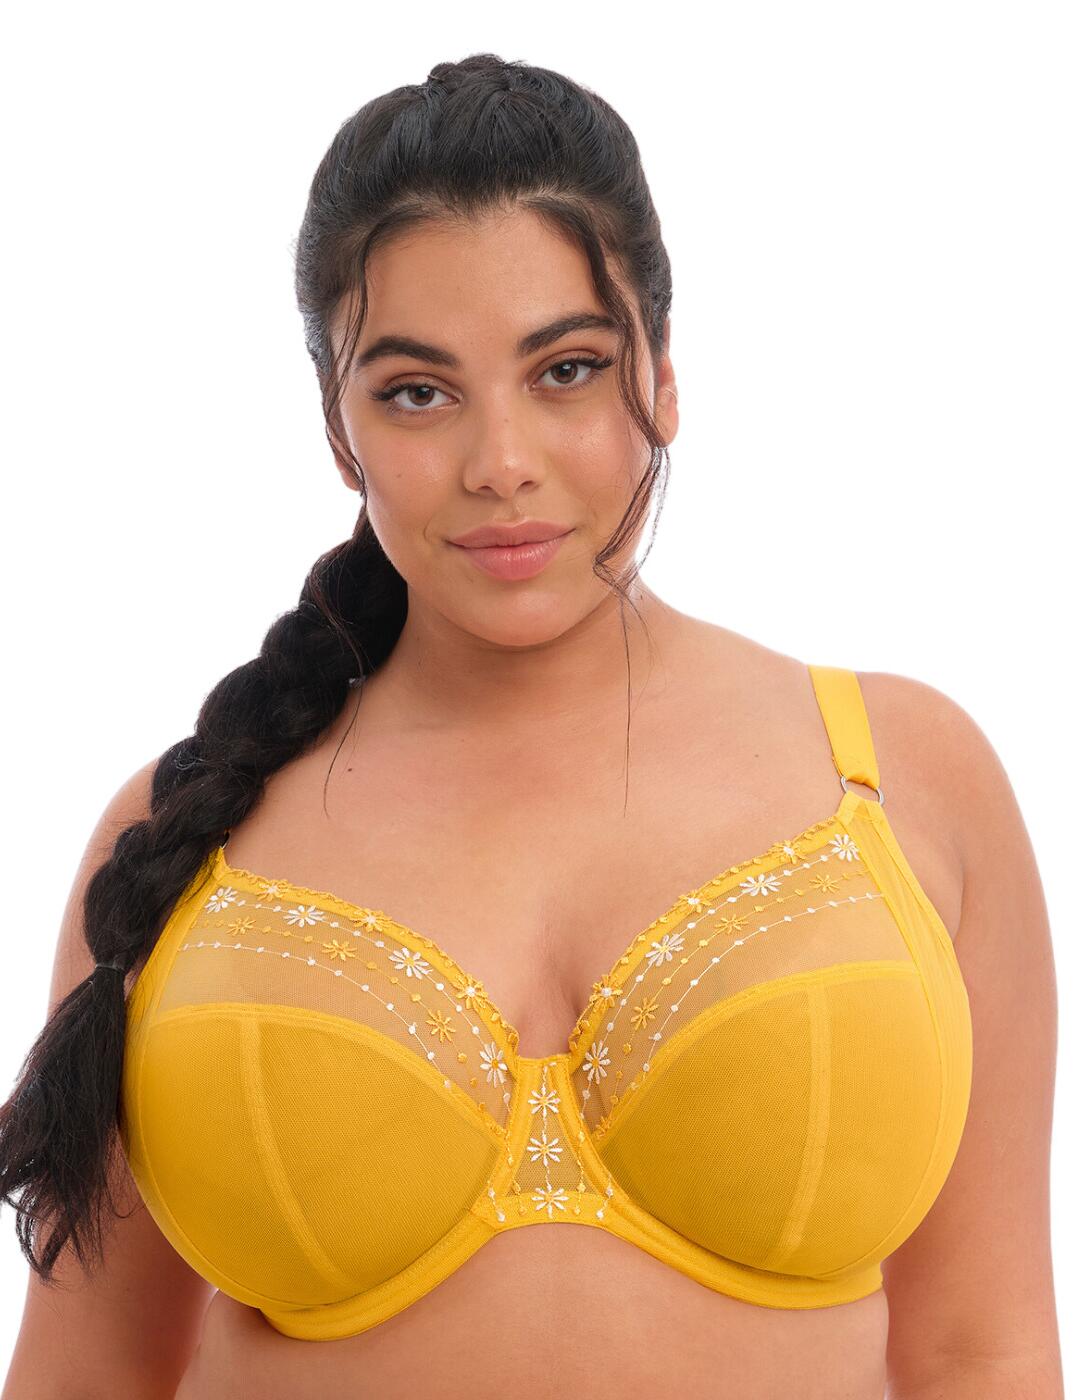 Women's Plunge Bras, Lingerie Outlet Store - Free UK Delivery